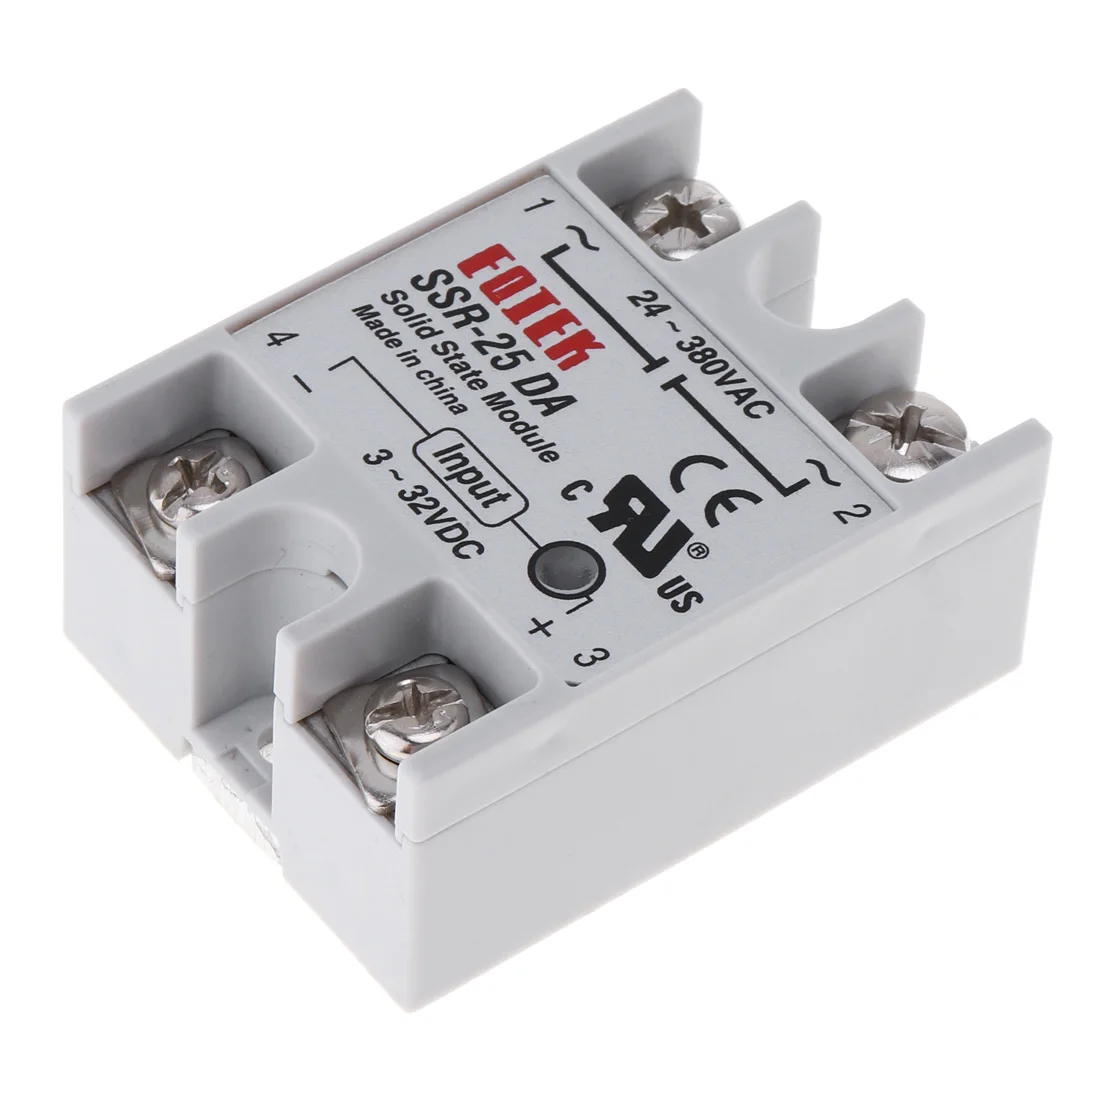 

1pcs SSR-25DA Durable Solid State Relay Gray Reliable Module 3-32V DC To 24V-380V AC 25A Automobile Accessories Fit for Cars